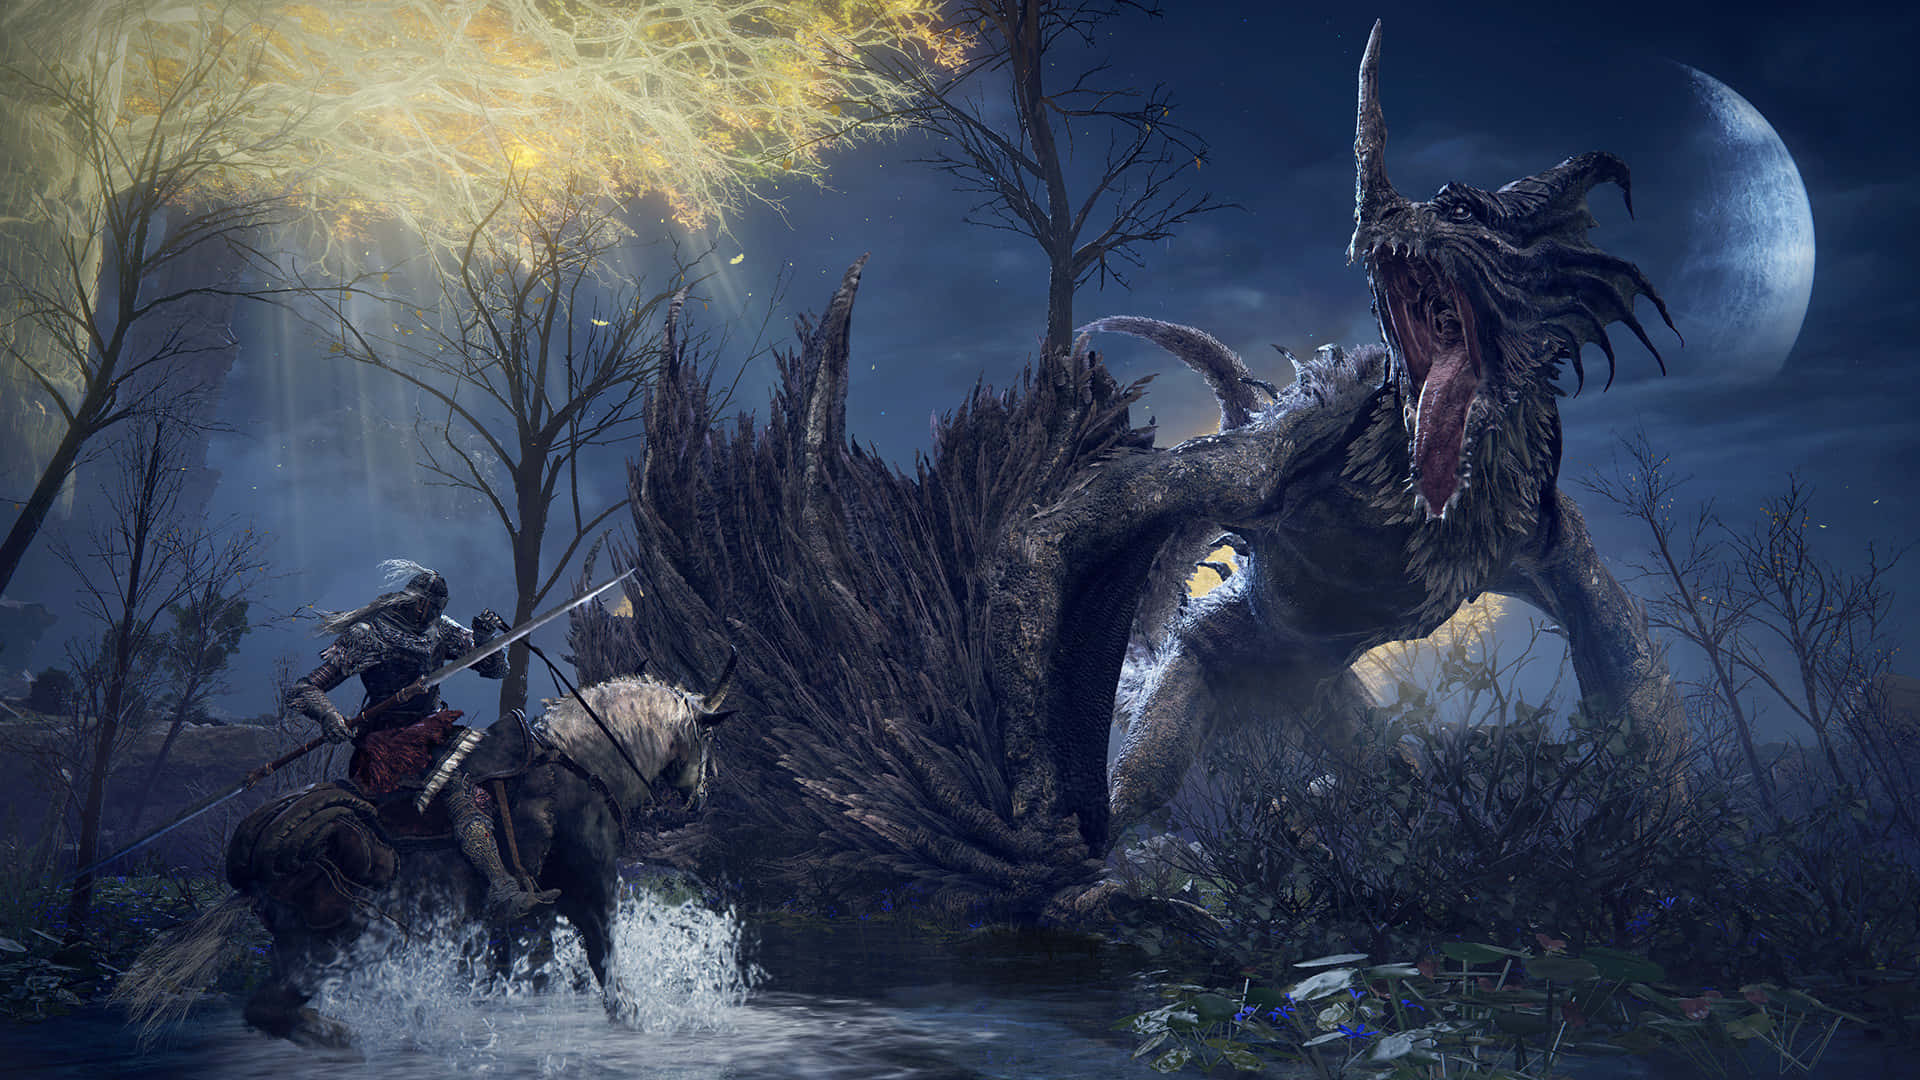 A Man Riding A Horse In The Woods Next To A Dragon Wallpaper